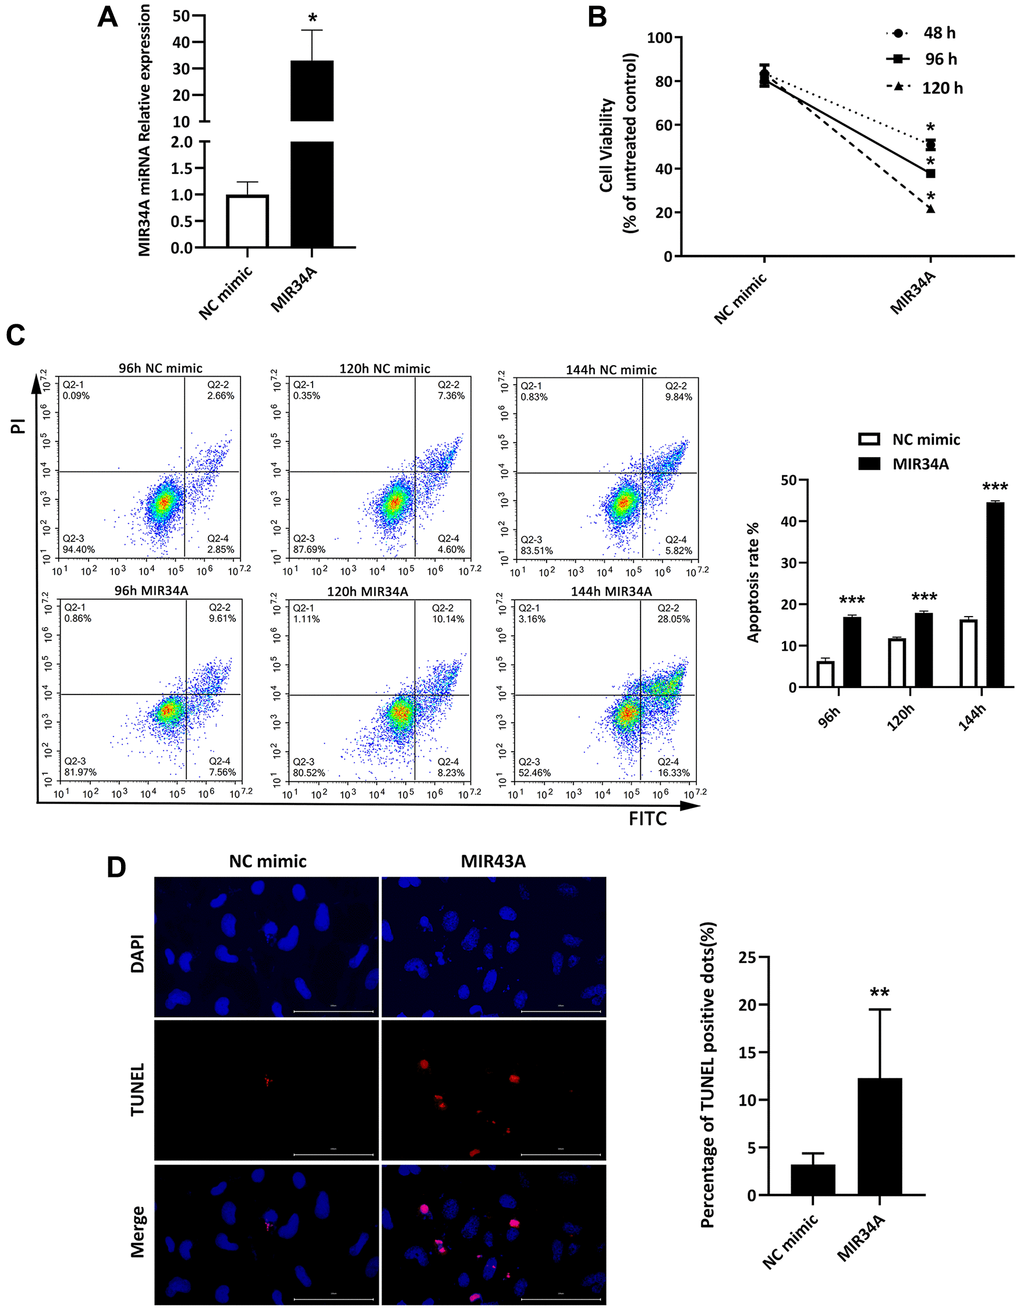 MIR34A is overexpressed in cataracts, inhibiting proliferation and inducing apoptosis of SRA01/04 cells. (A) RT-qPCR analysis was performed to detect the expression of MIR34A after MIR34A mimics were transfected into SRA01/04 cells. (B) SRA01/04 cells were performed as A, the viability of cells was assessed at 48 h, 96 h, and 120 h by CCK-8 after transfected. (C) SRA01/04 cells were performed as A, and the cell apoptosis was assessed at 96 h, 120 h, and 144 h by flow cytometry. (D) SRA01/04 cells were performed as A, the TUNEL assay was performed to detect the apoptosis at 120 h. Scale bars: 100 μm. *P **P ***P 